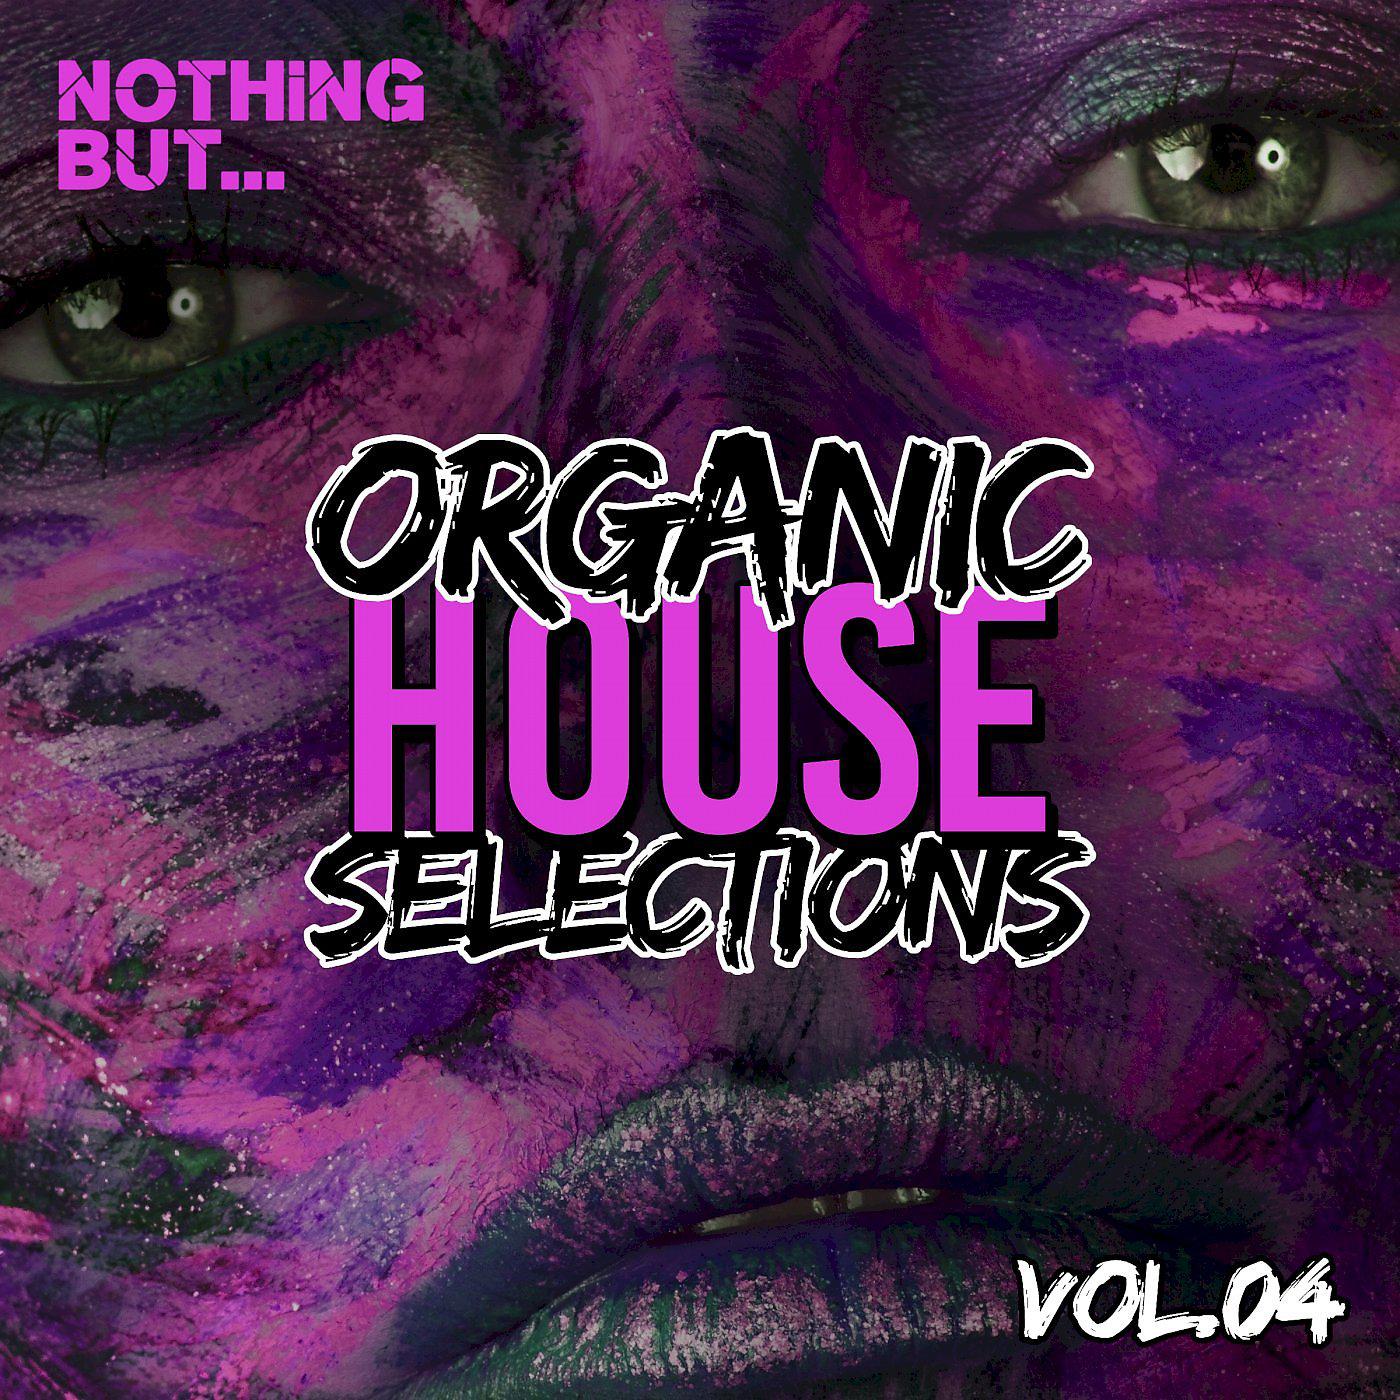 Постер альбома Nothing But... Organic House Selections, Vol. 04